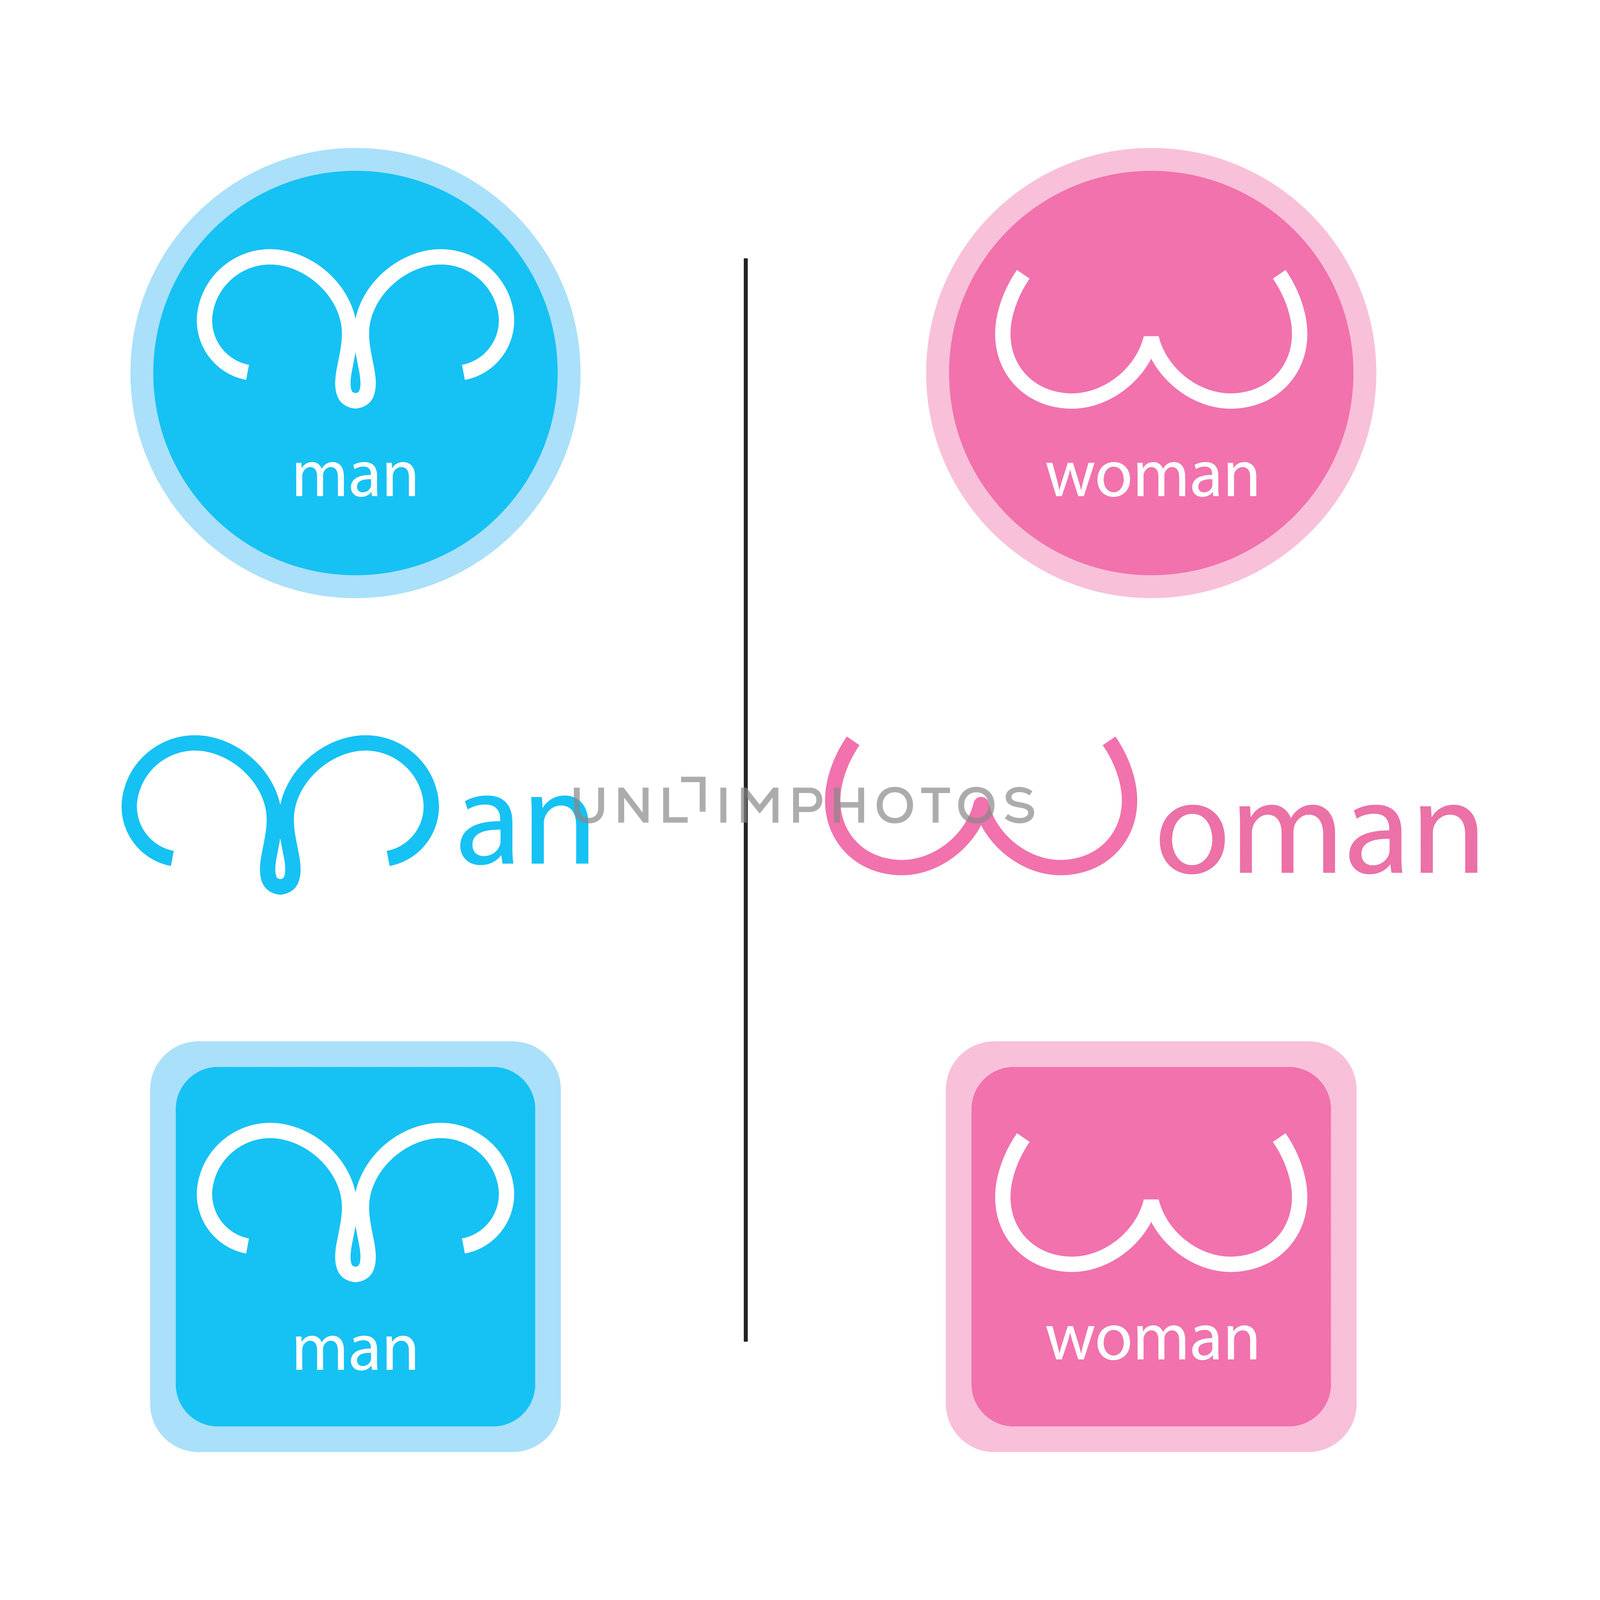 Man and woman symbol by rawich06